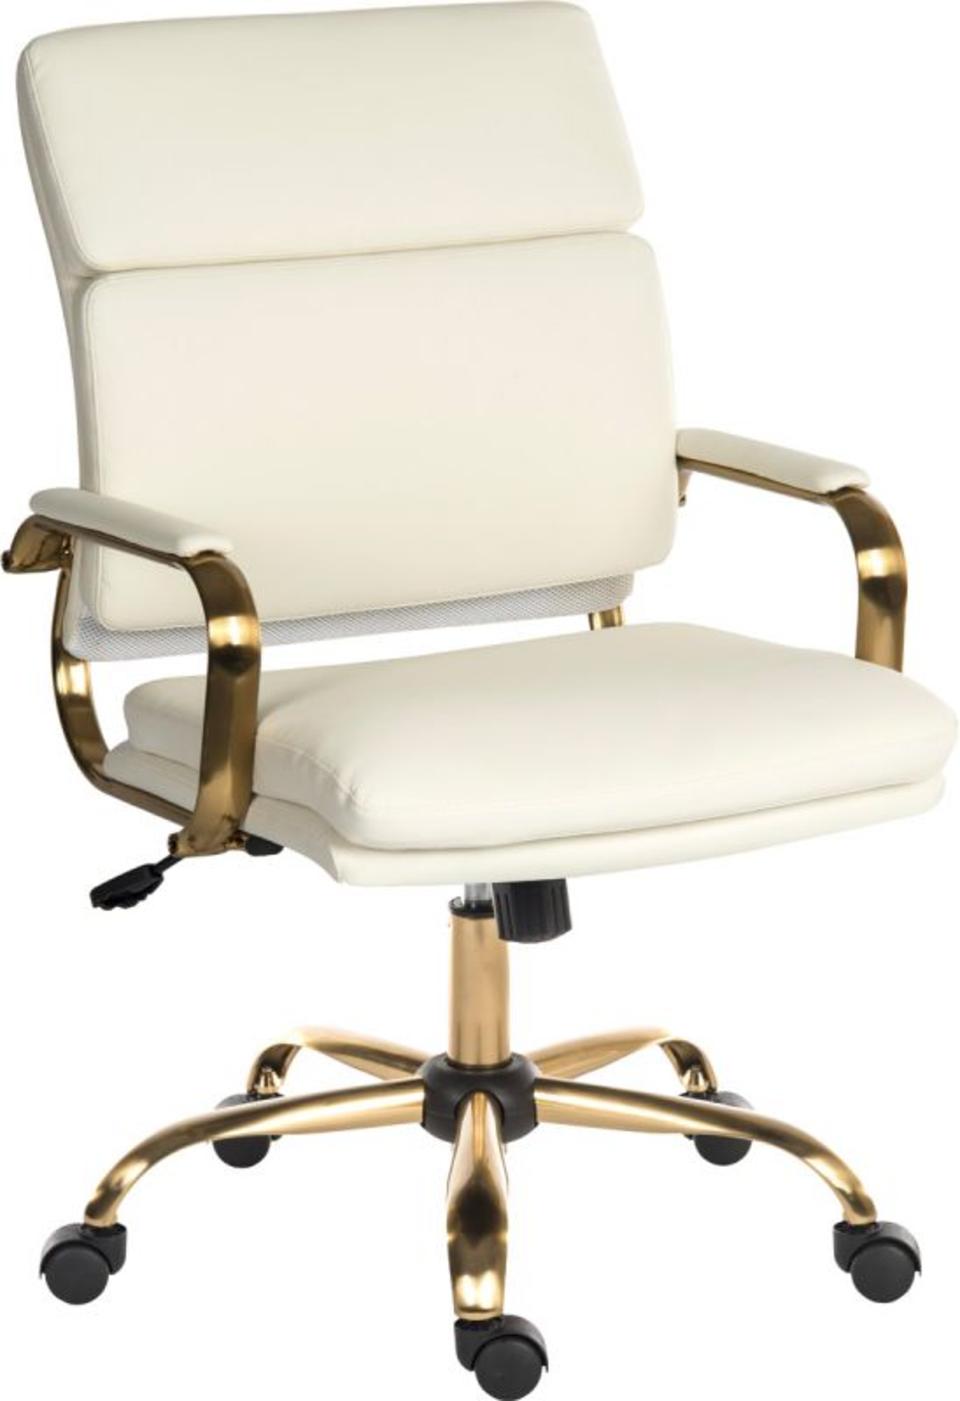 Vintage Executive Chair White Faux Leather